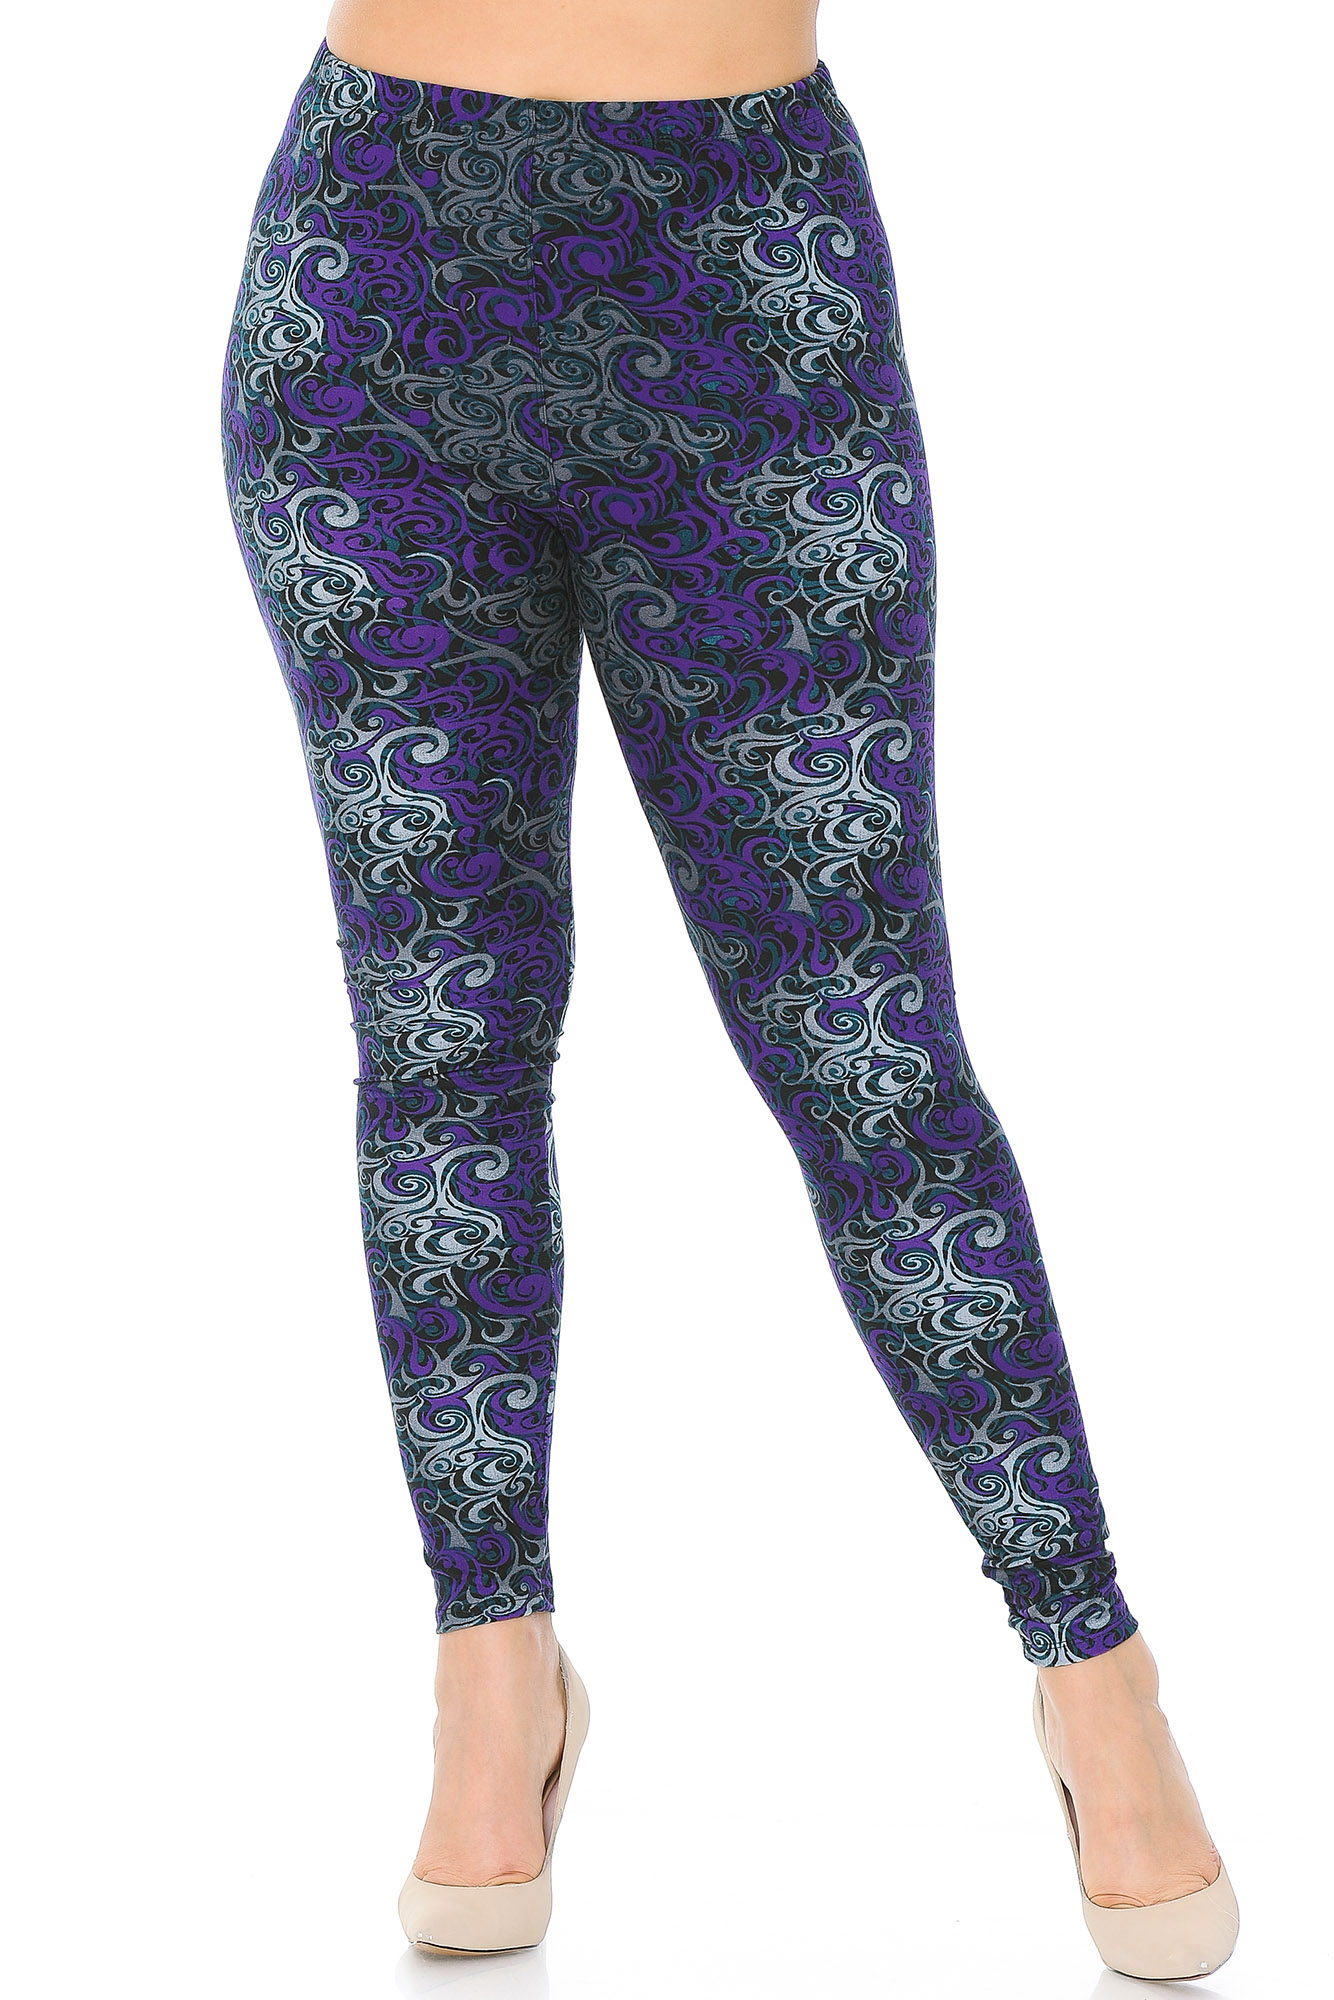 Wholesale Buttery Smooth Purple Tangled Swirl Extra Plus Size Leggings - 3X-5X